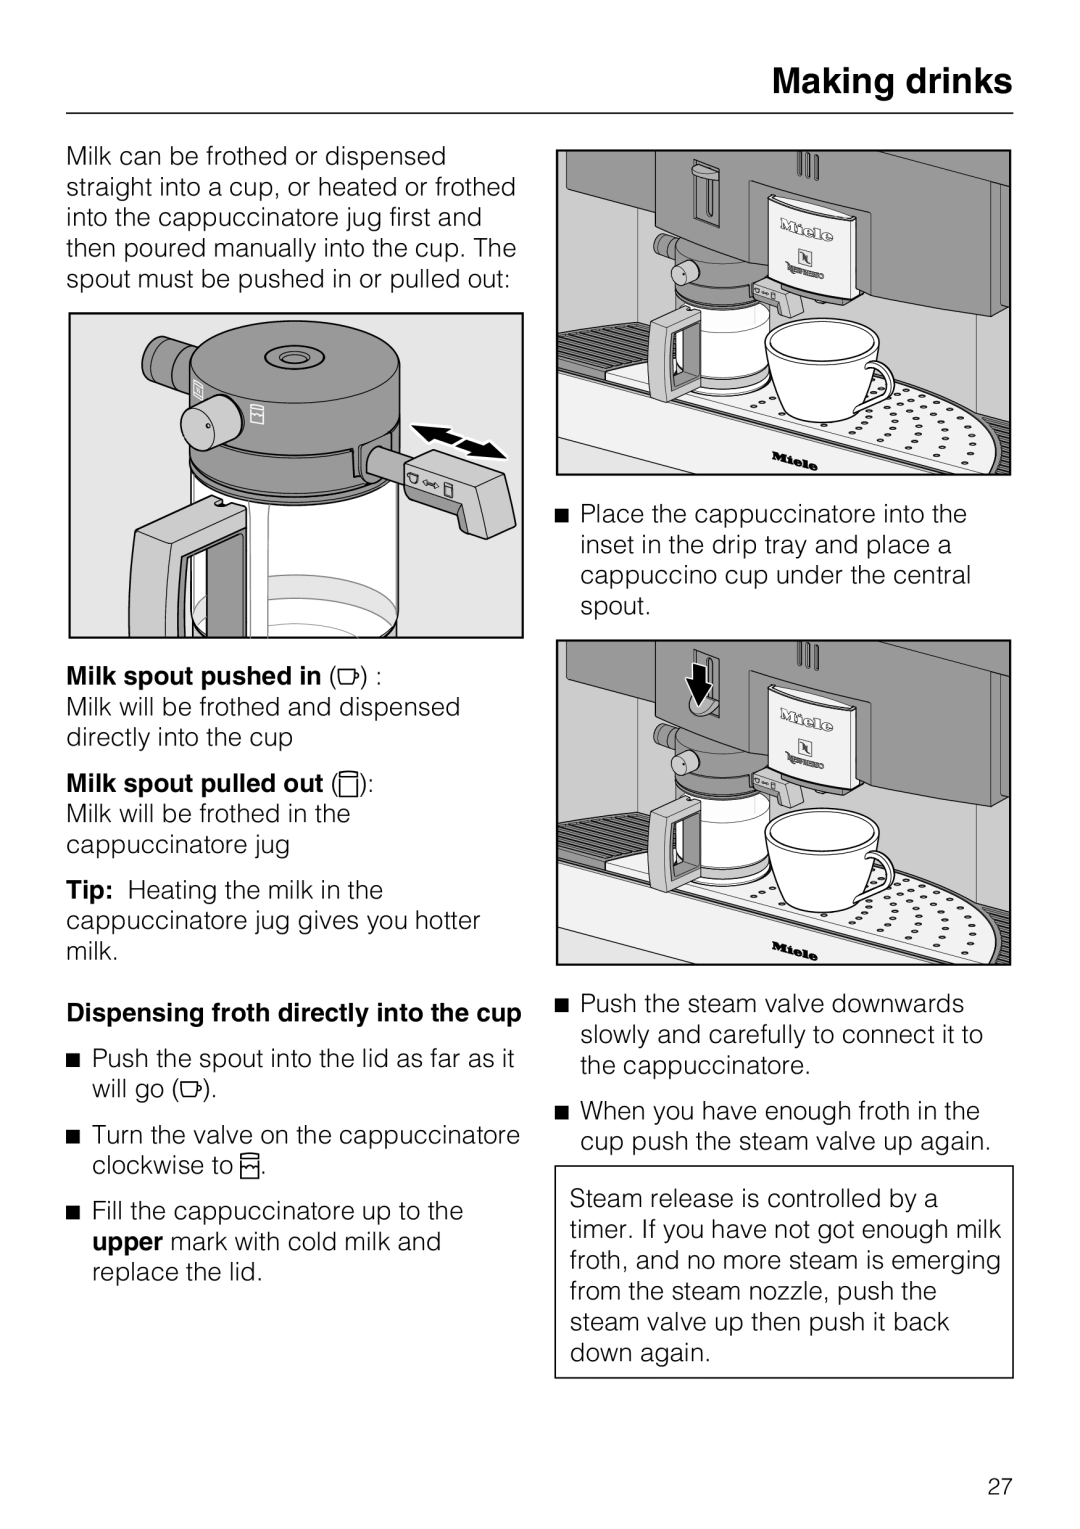 Miele CVA 6431 (C) installation instructions Making drinks, Milk spout pushed in, Dispensing froth directly into the cup 